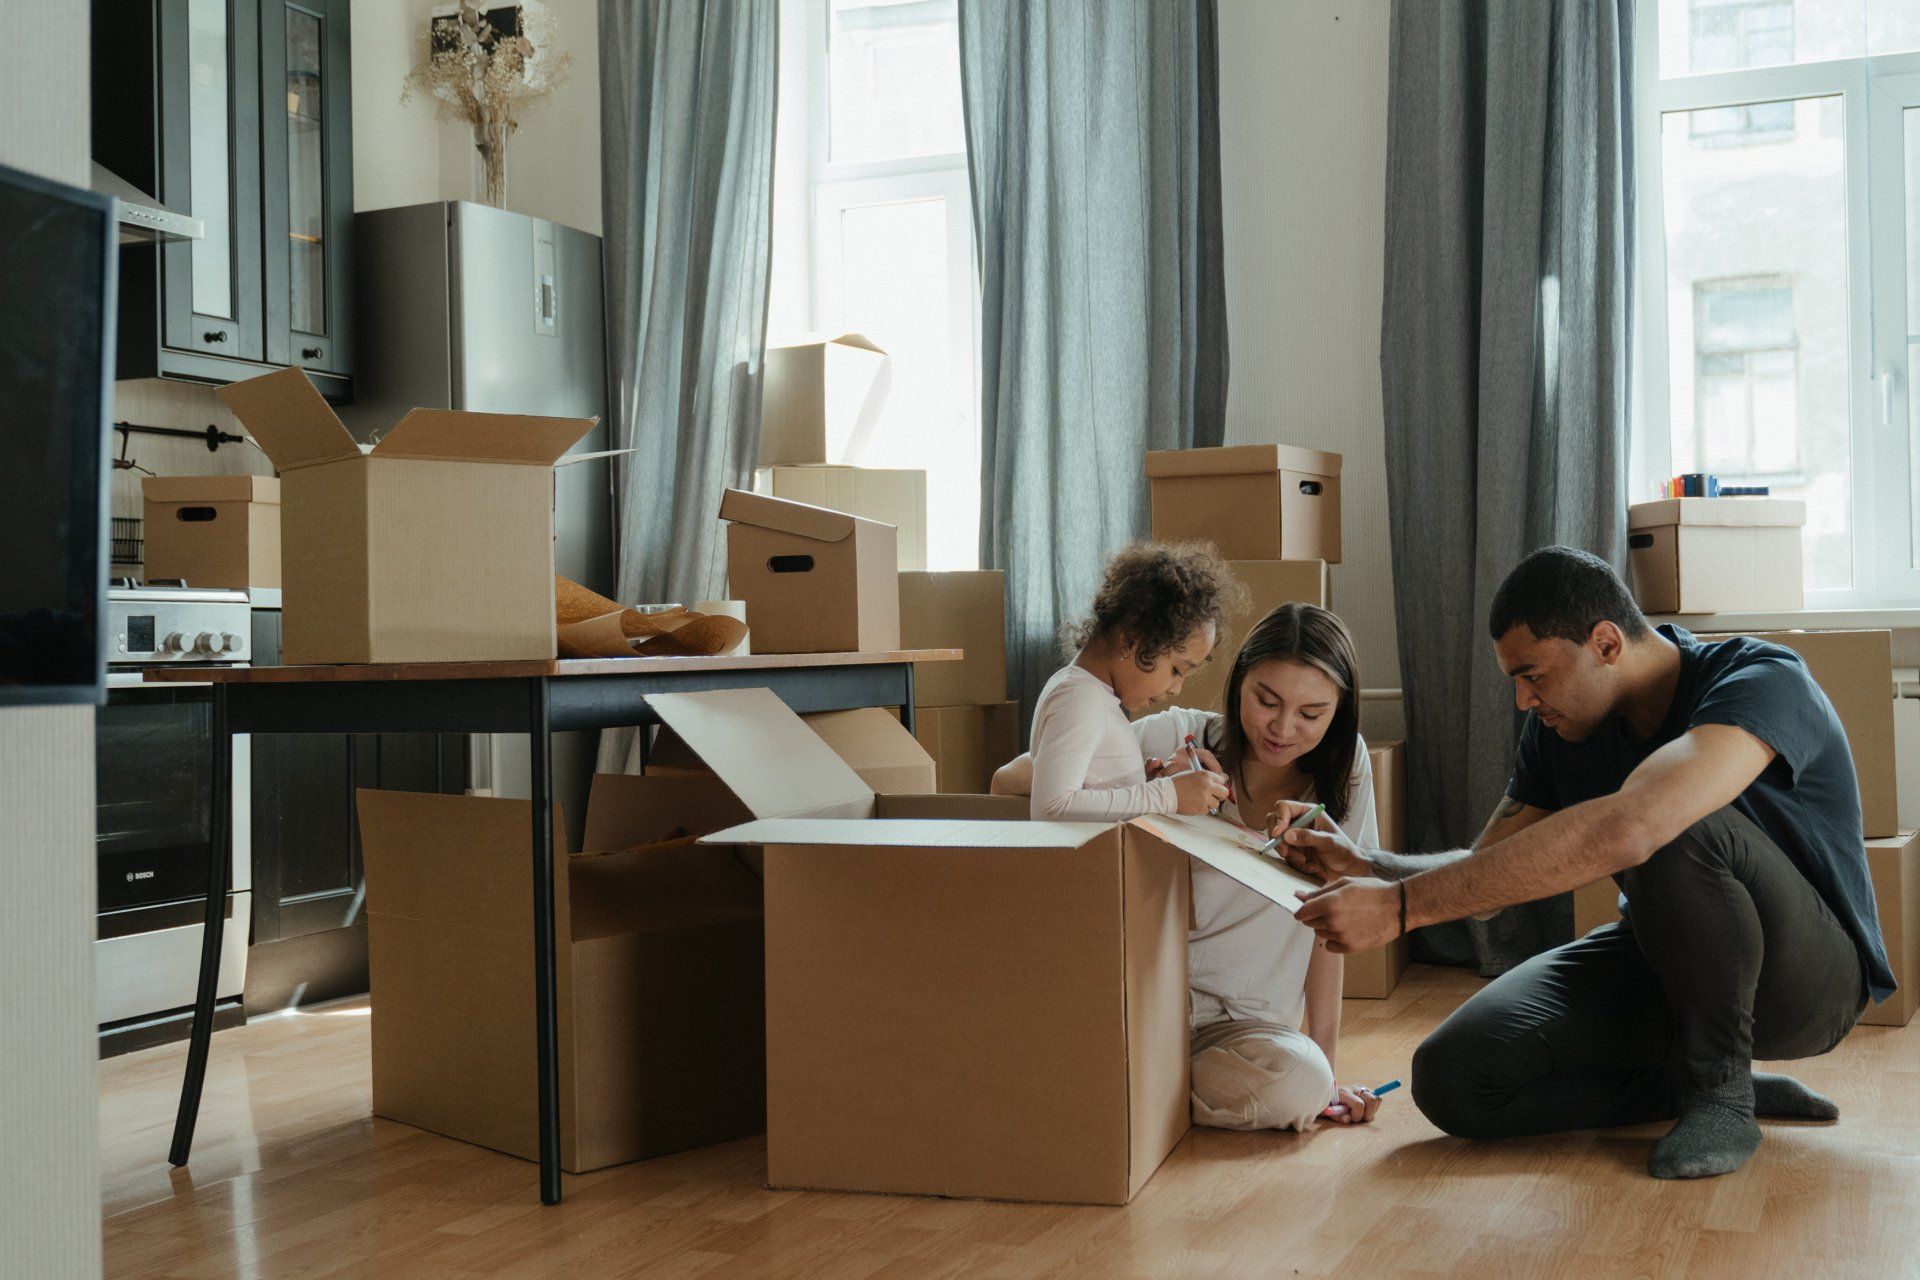 Family opening boxes in their new home